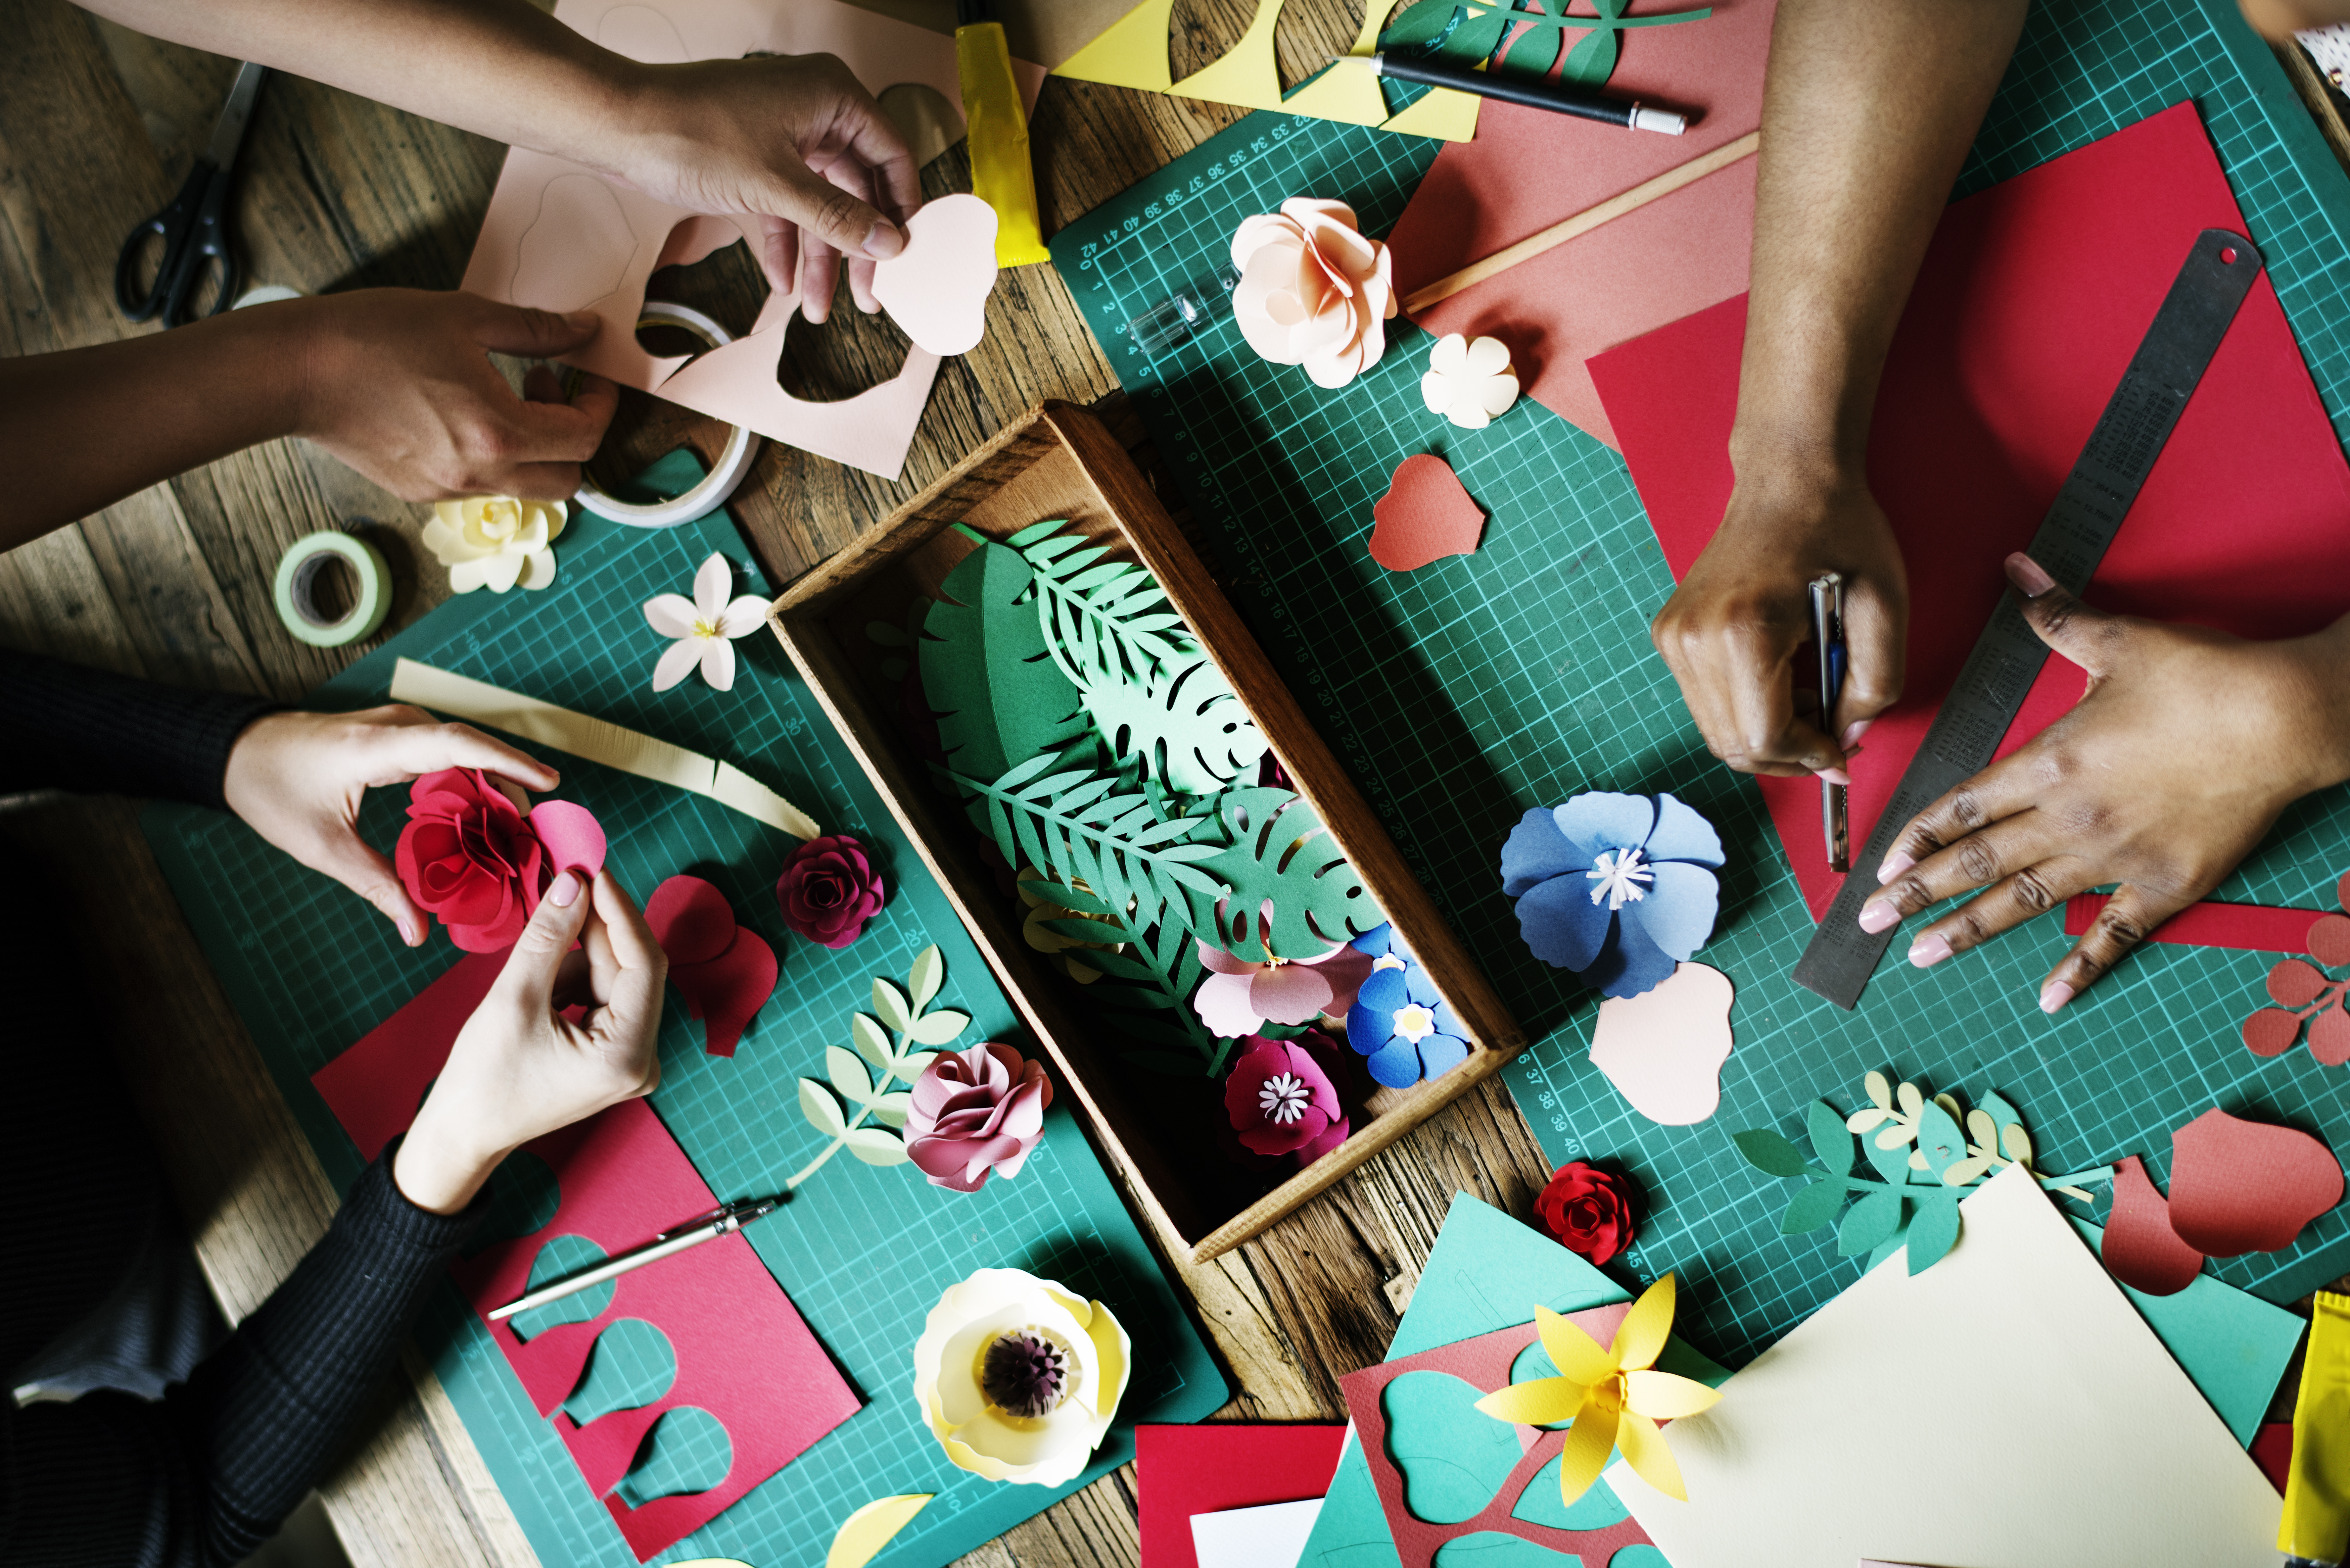 A photo of adult hands creating crafts on a table.